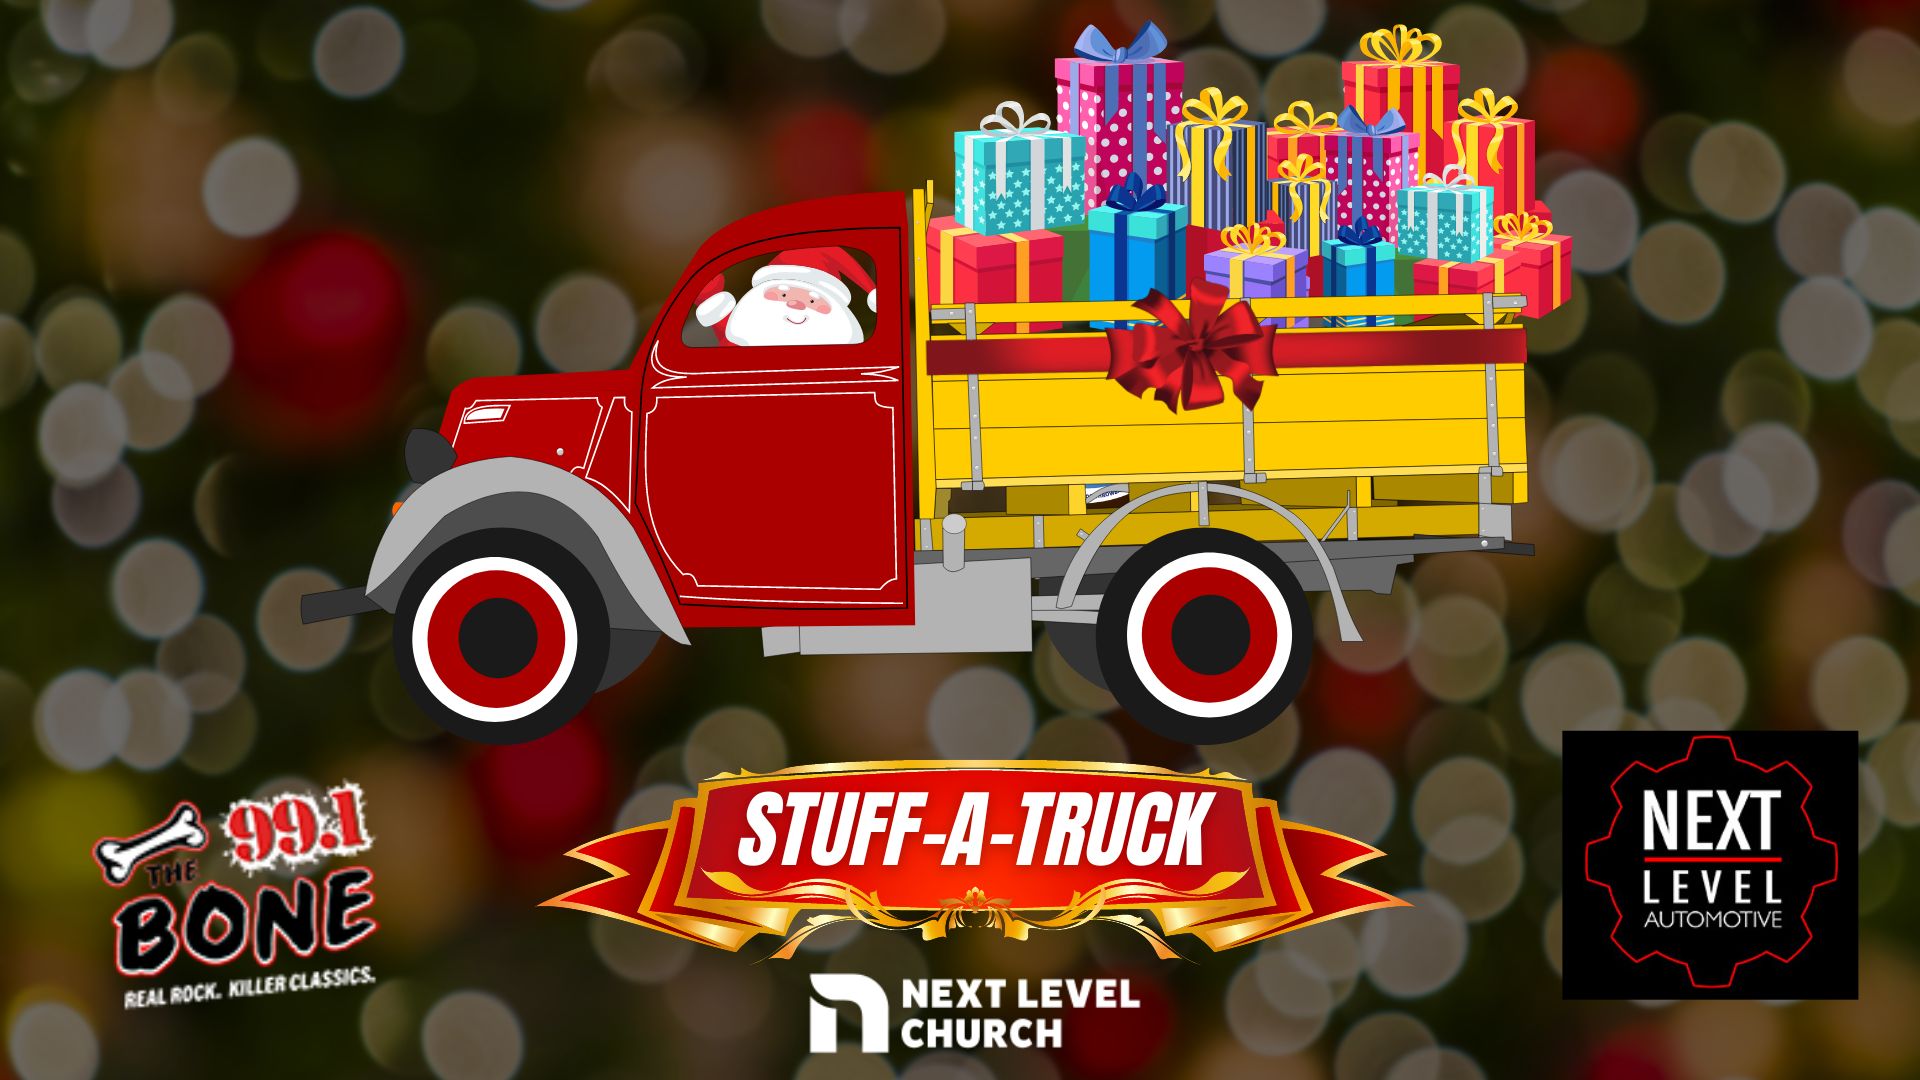 Give To The Next Level This Holiday Season At The Stuff-A-Truck